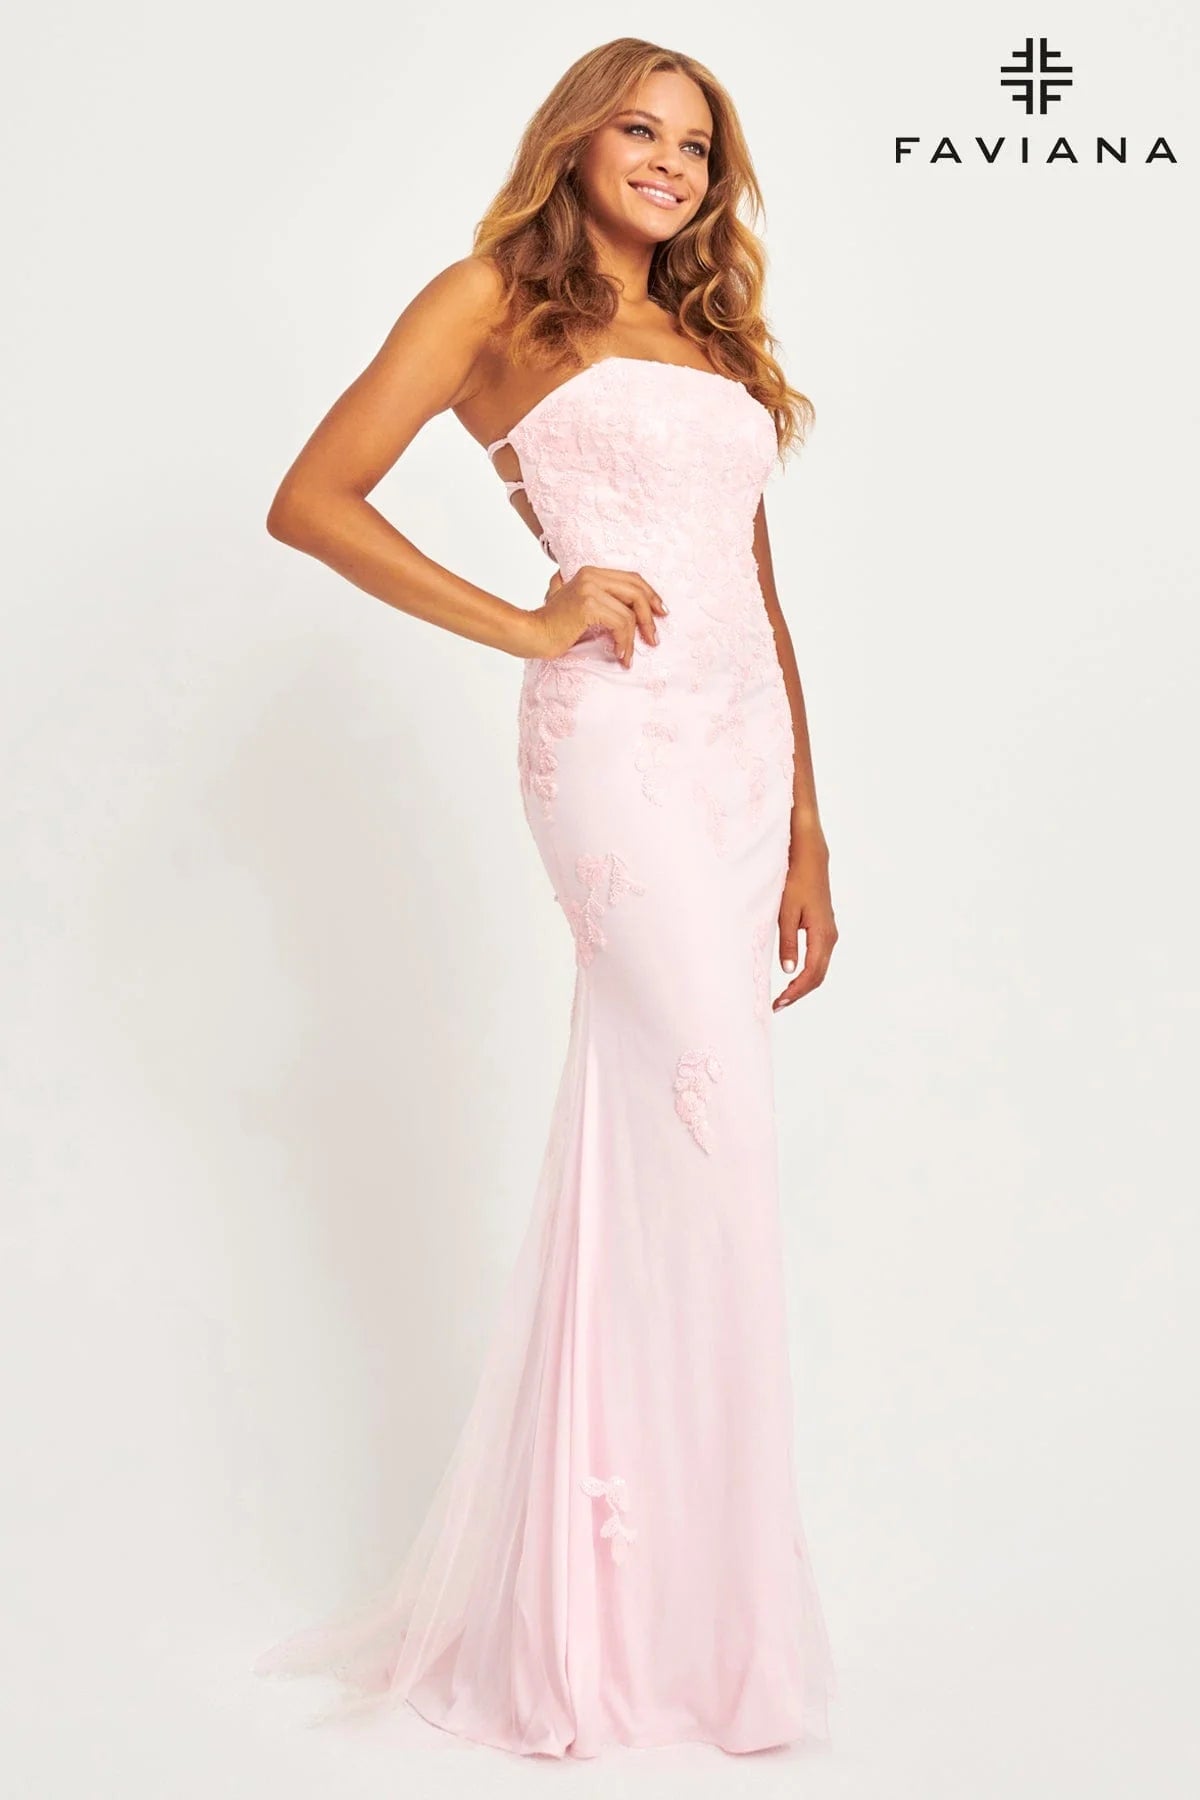  Strapless Light Pink Tulle And Lace Appliqué Dress For Prom